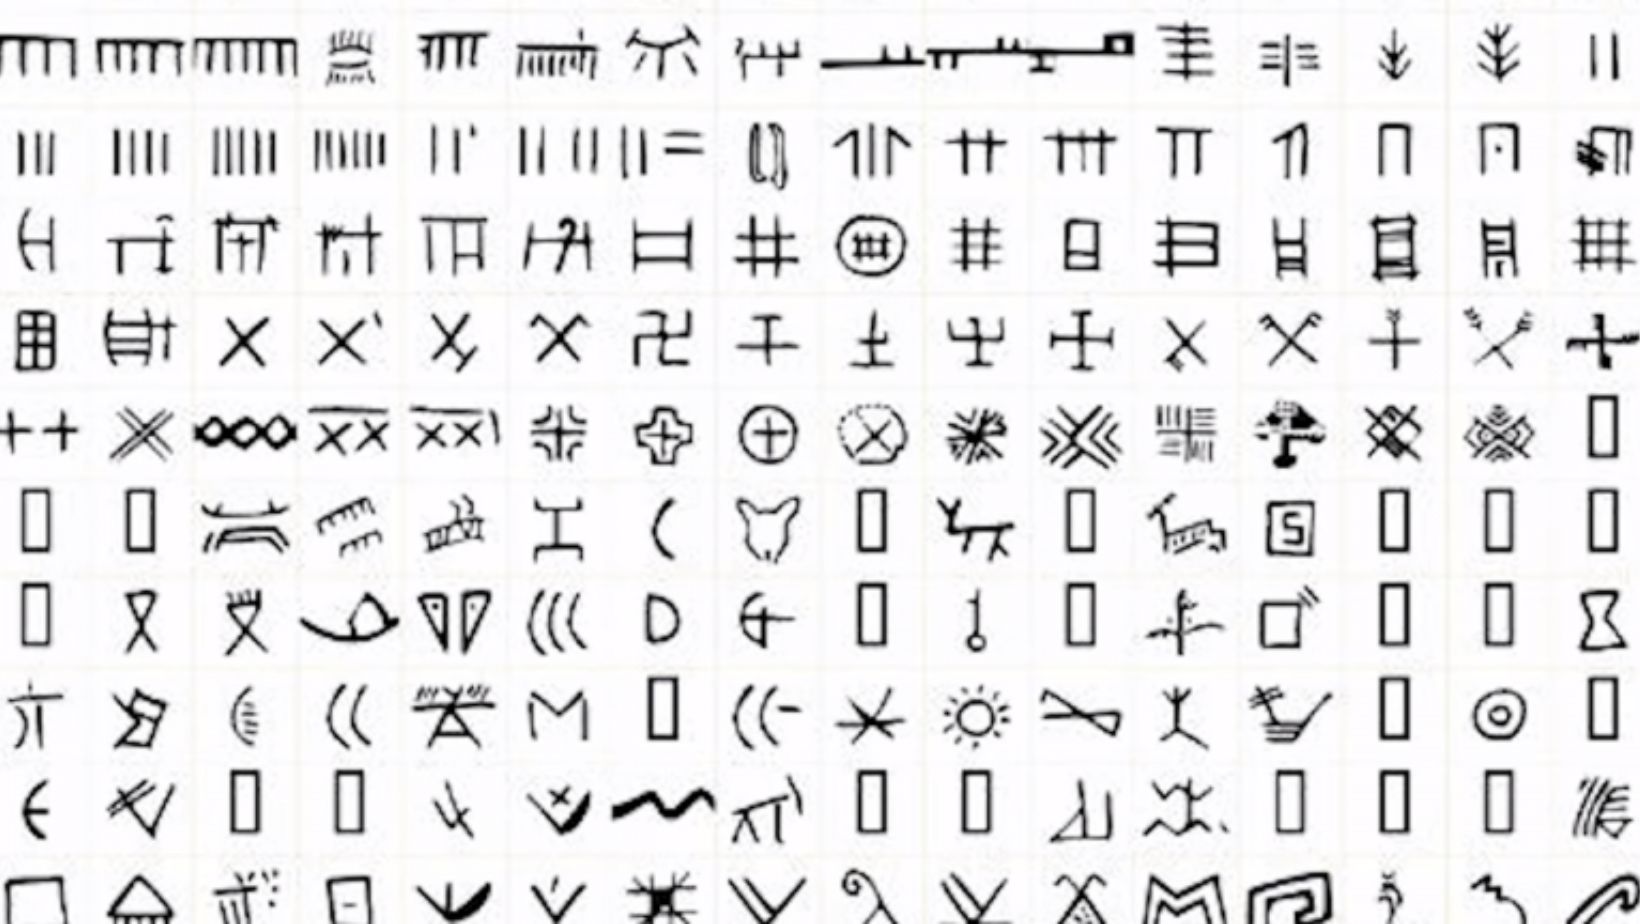 Deciphering the Tărtăria Tablets: Ancient Hungarian Writing or Mysterious Symbols?